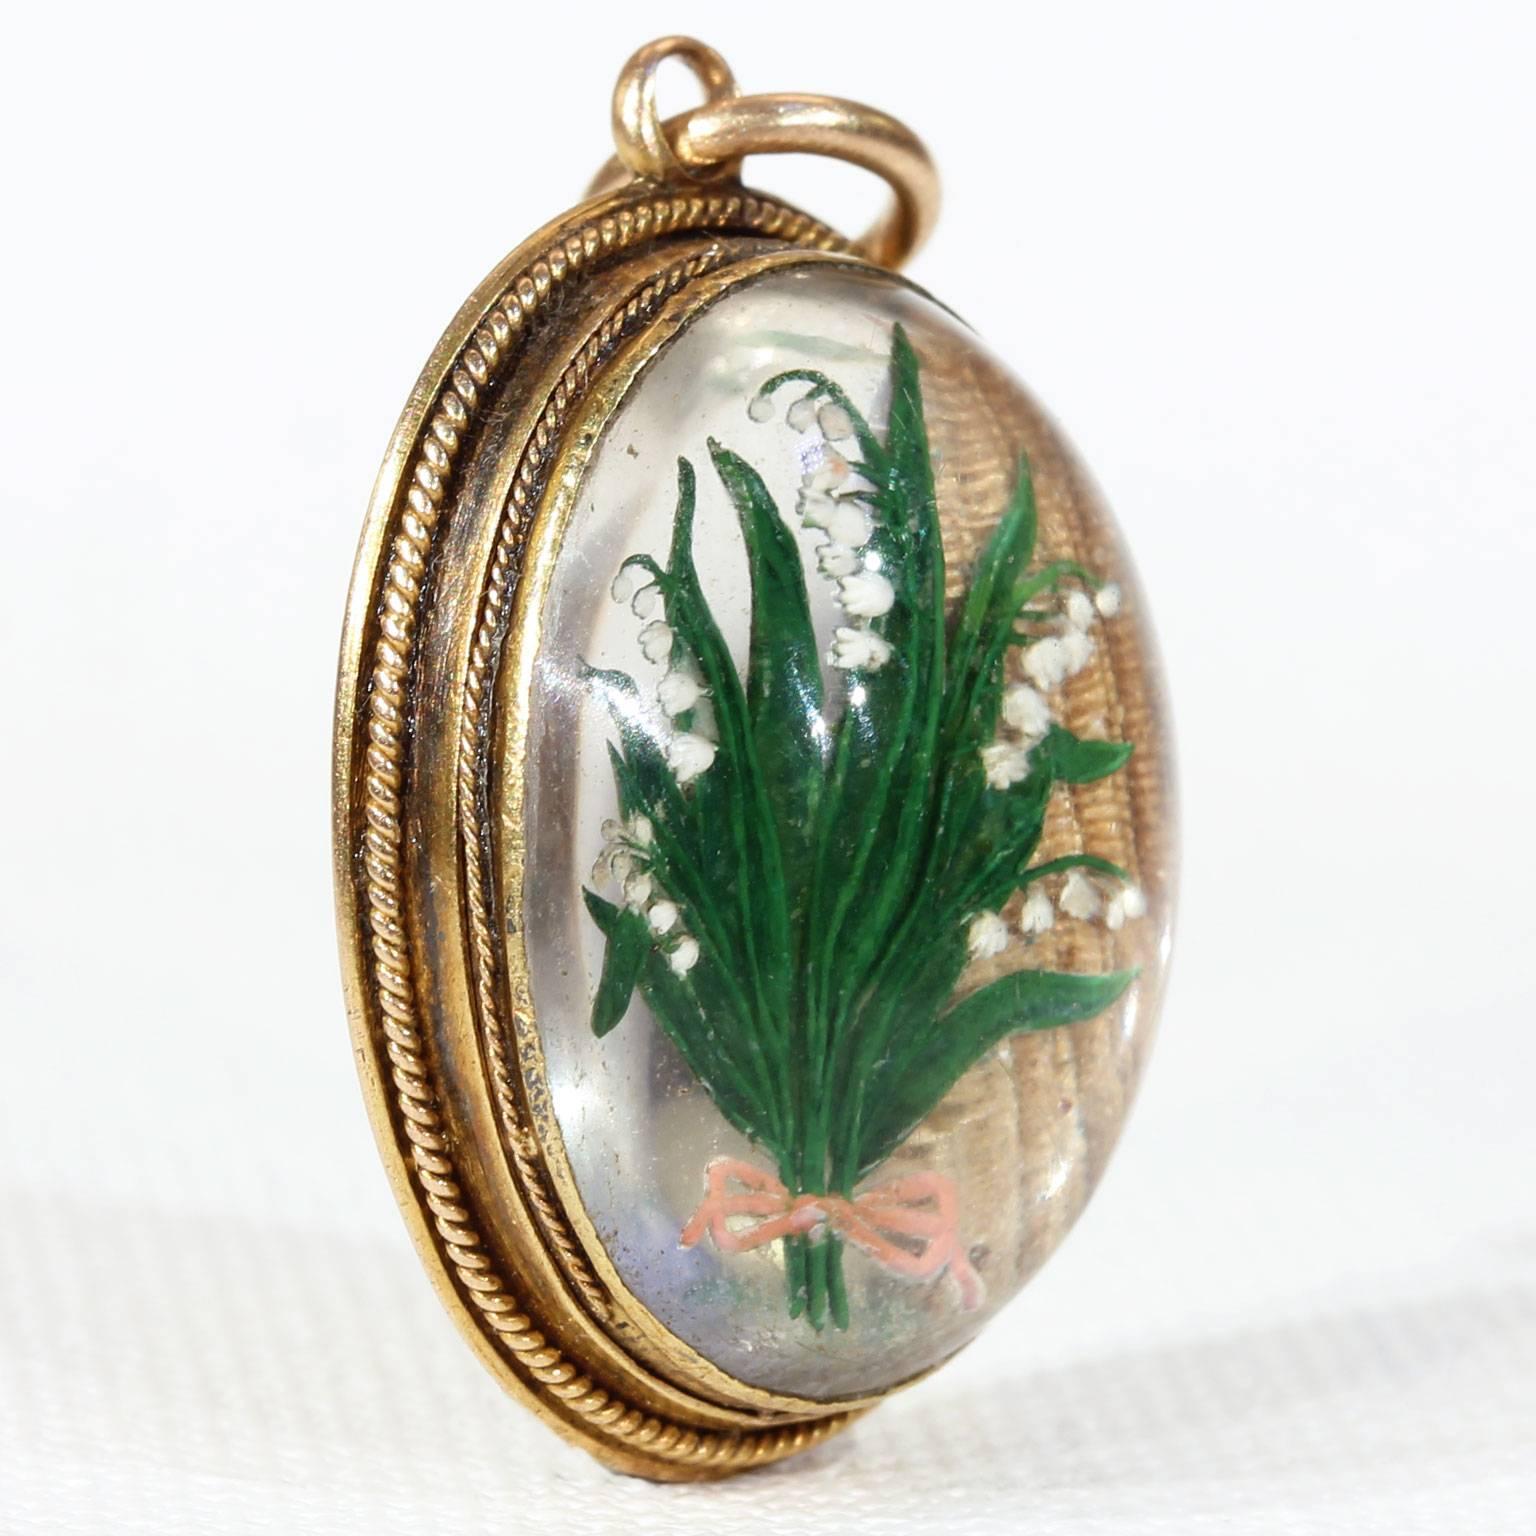 This reverse crystal intaglio is made from a smooth cabochon of rock crystal with a lily of the valley flower carved expertly into the flat back and then oil painted with bright colors to bring it to richly detailed life. The crystal is set into a